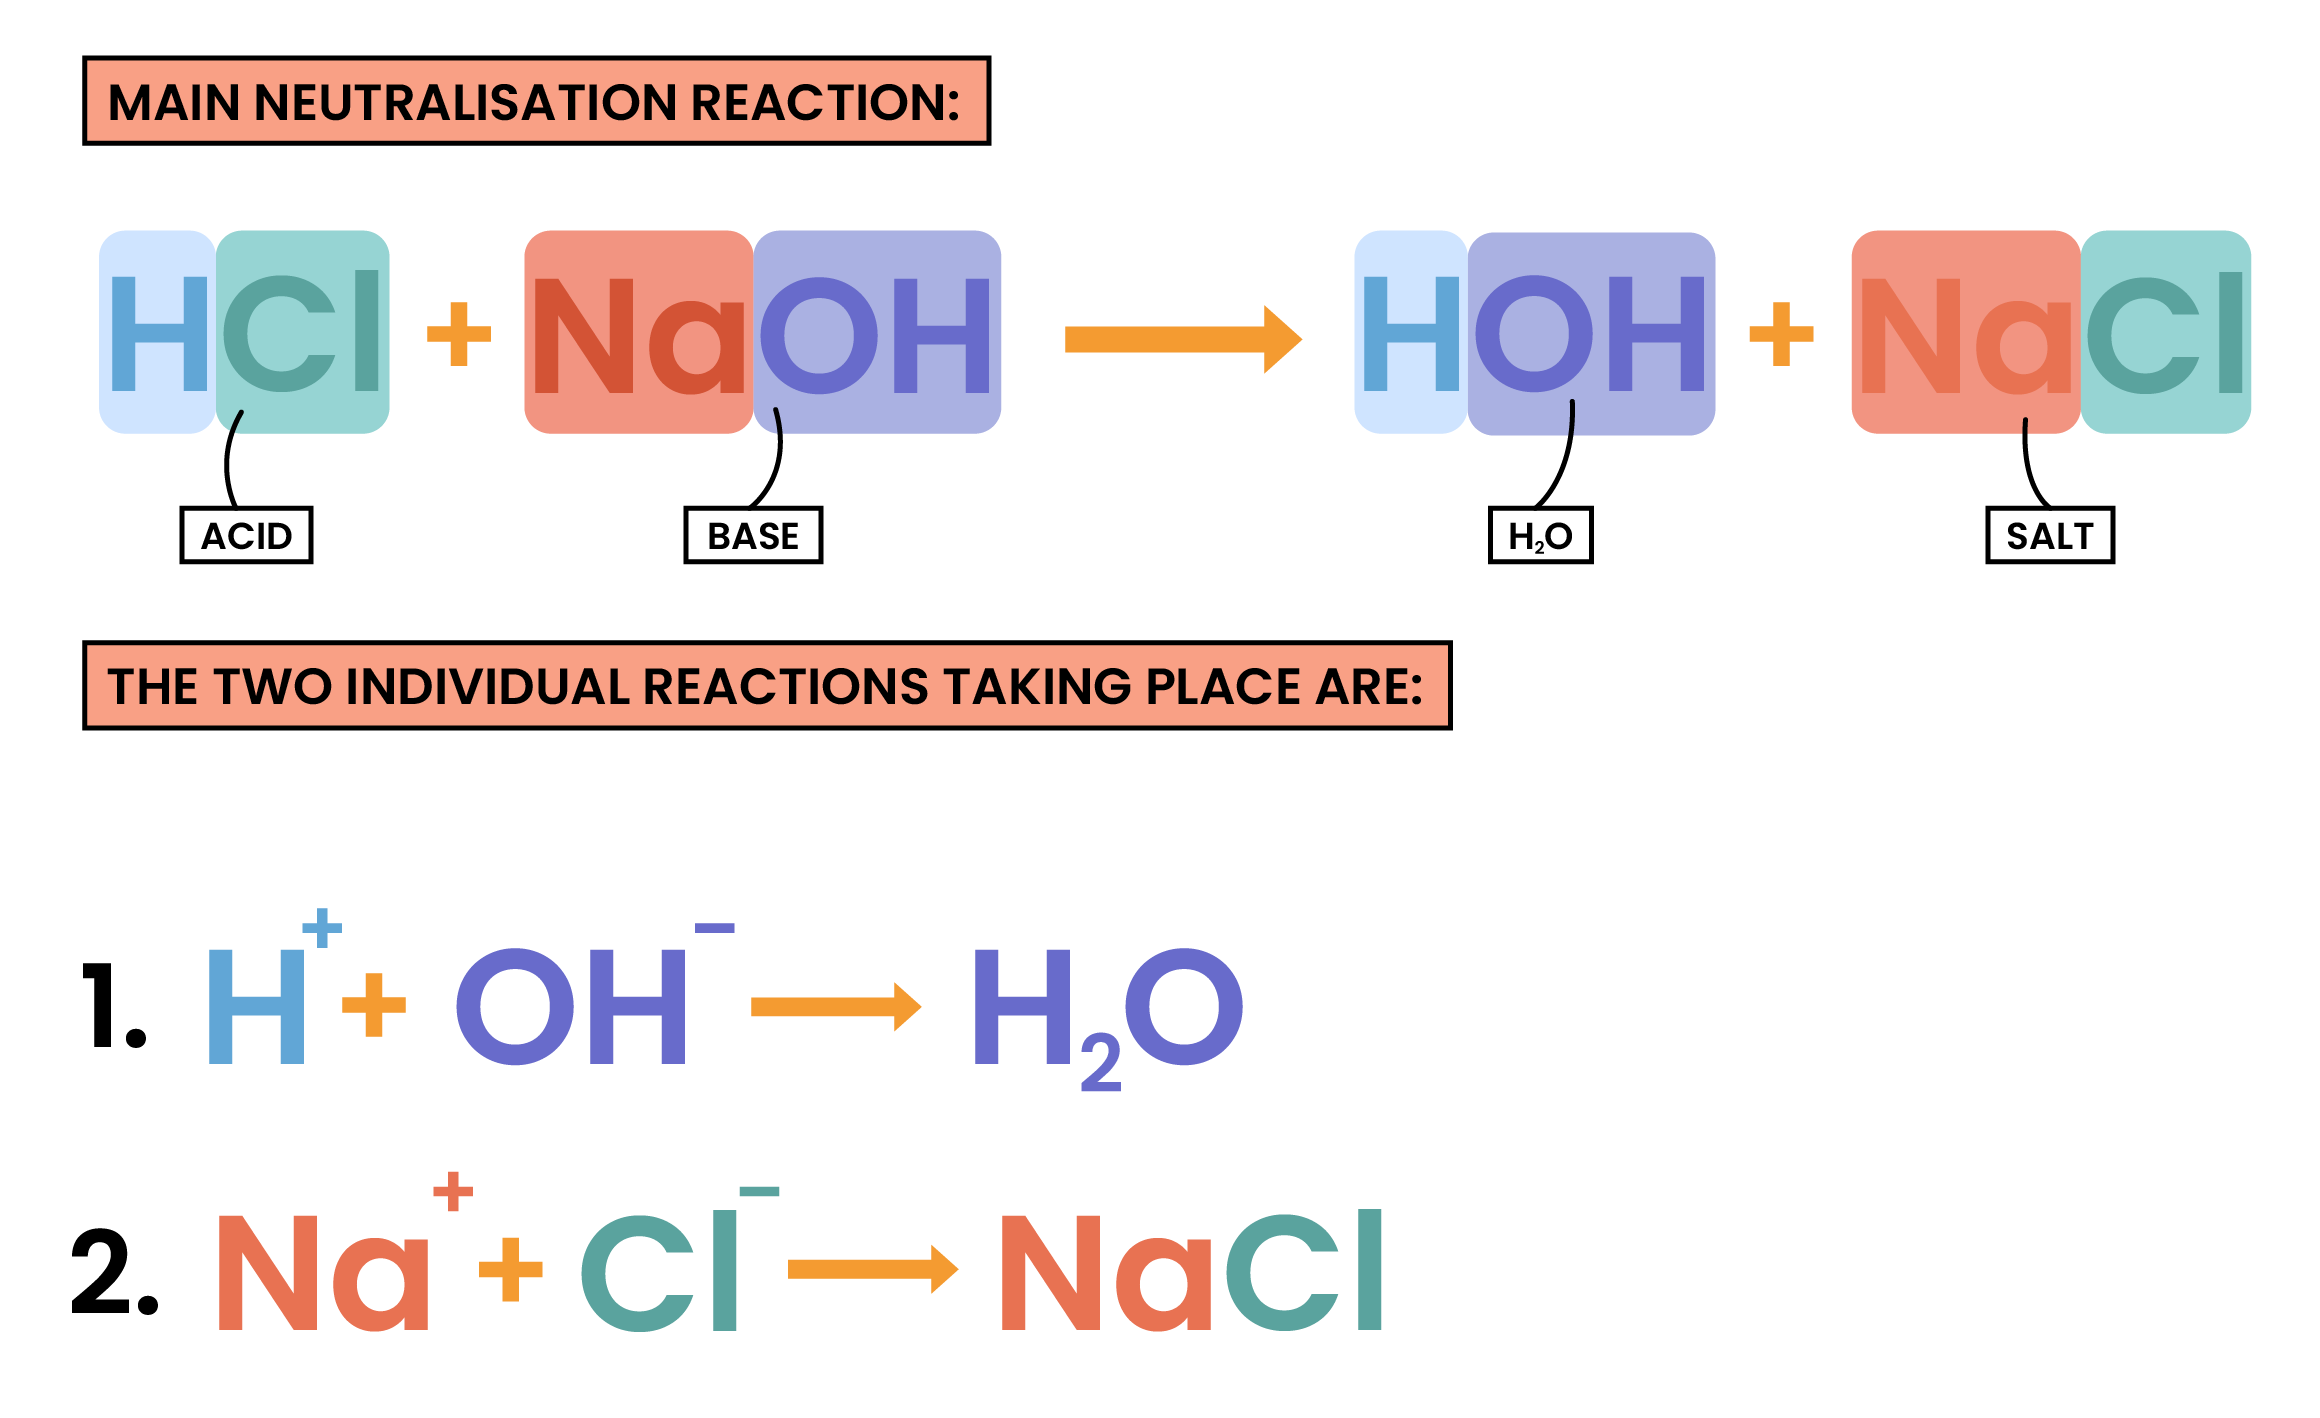 edexcel_igcse_chemistry_topic 15_acids, alkalis, and titrations_003_neutralisation reaction diagram shown ionic half equations